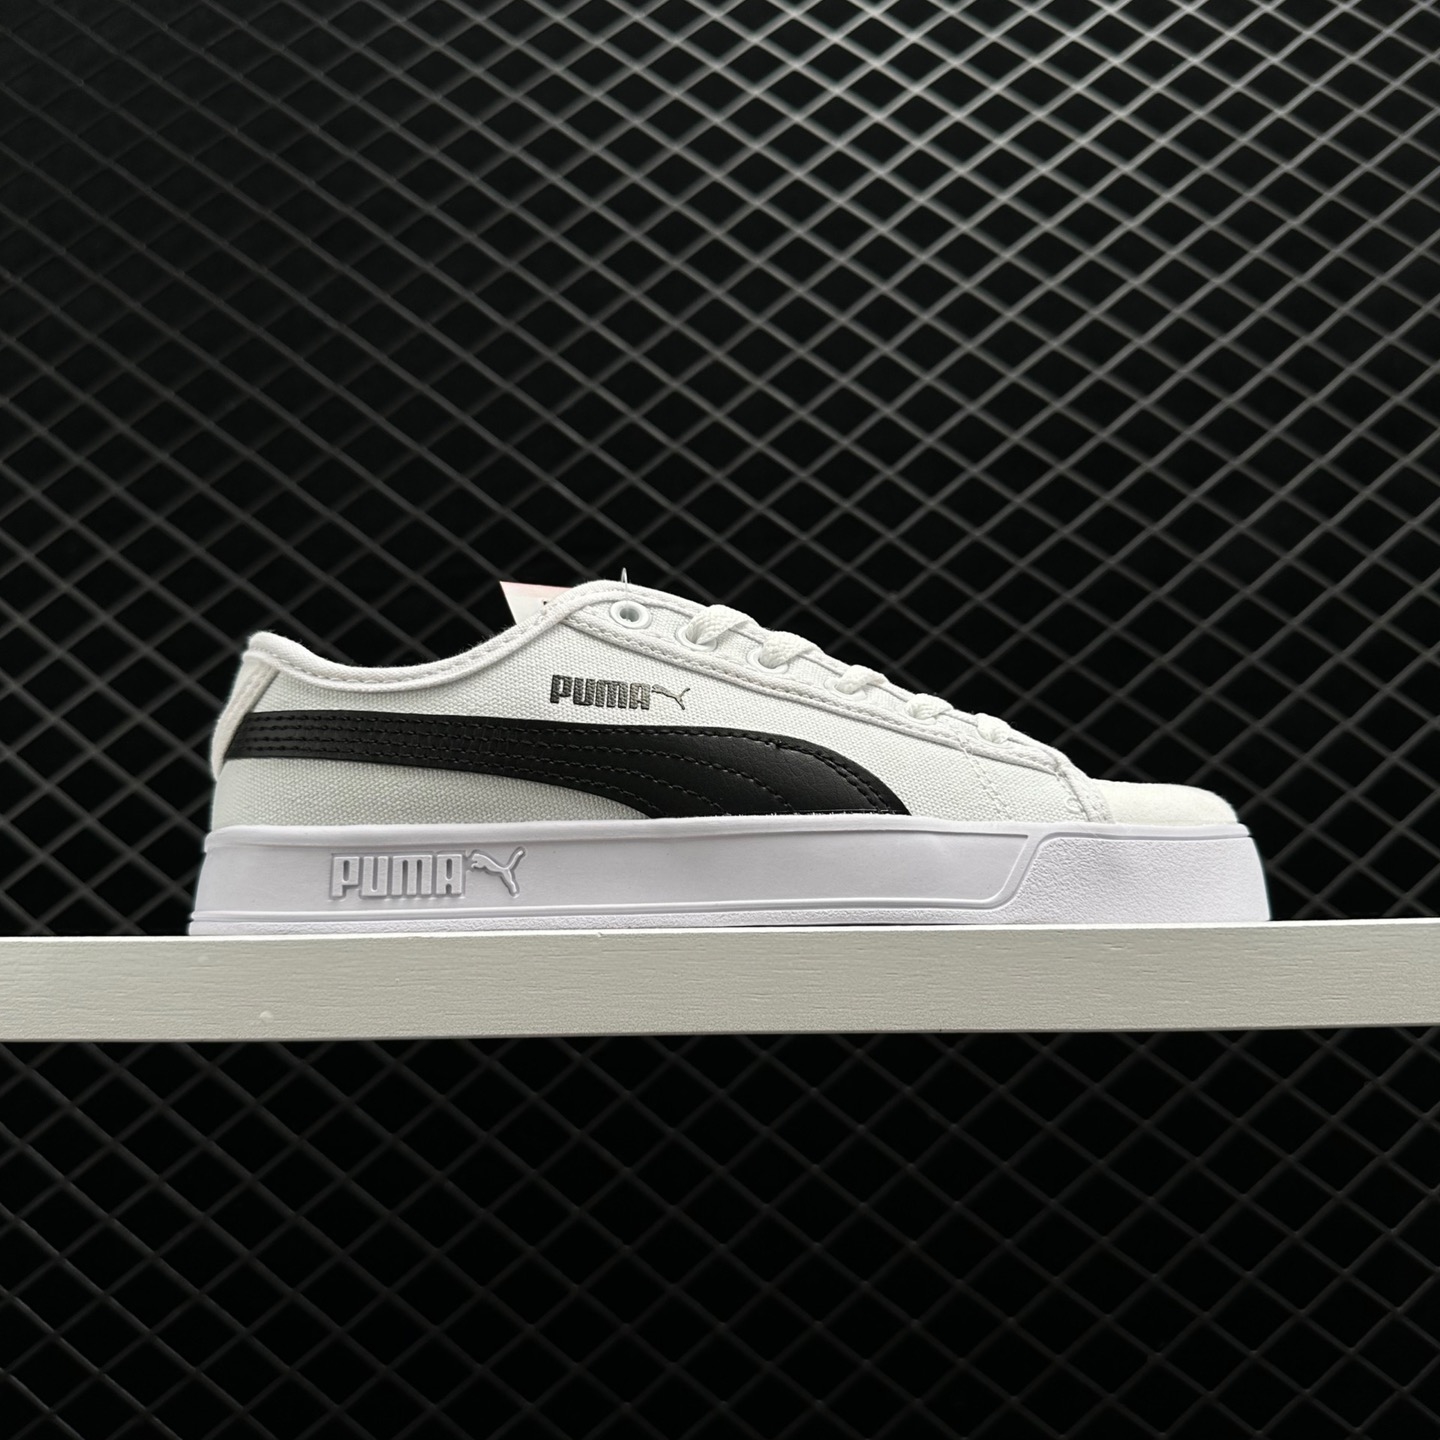 Puma Wmns Vikky Stacked 'White Black' 369143 07 - Stylish and Versatile Women's Sneakers